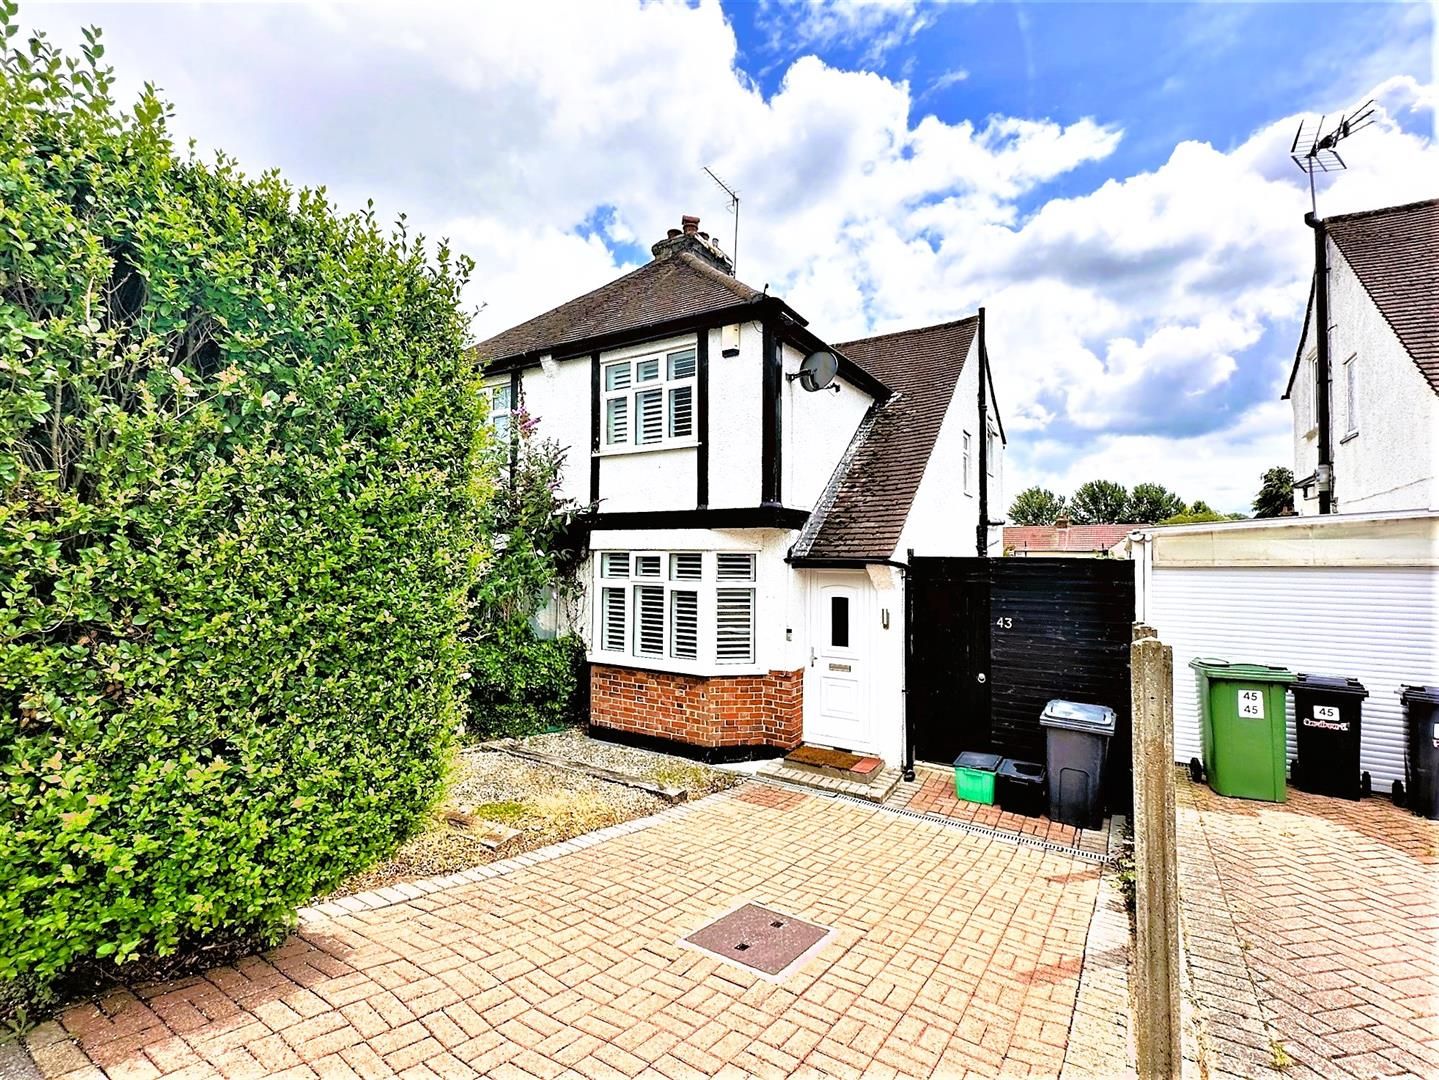 East Drive, Orpington, Kent, BR5 2BY